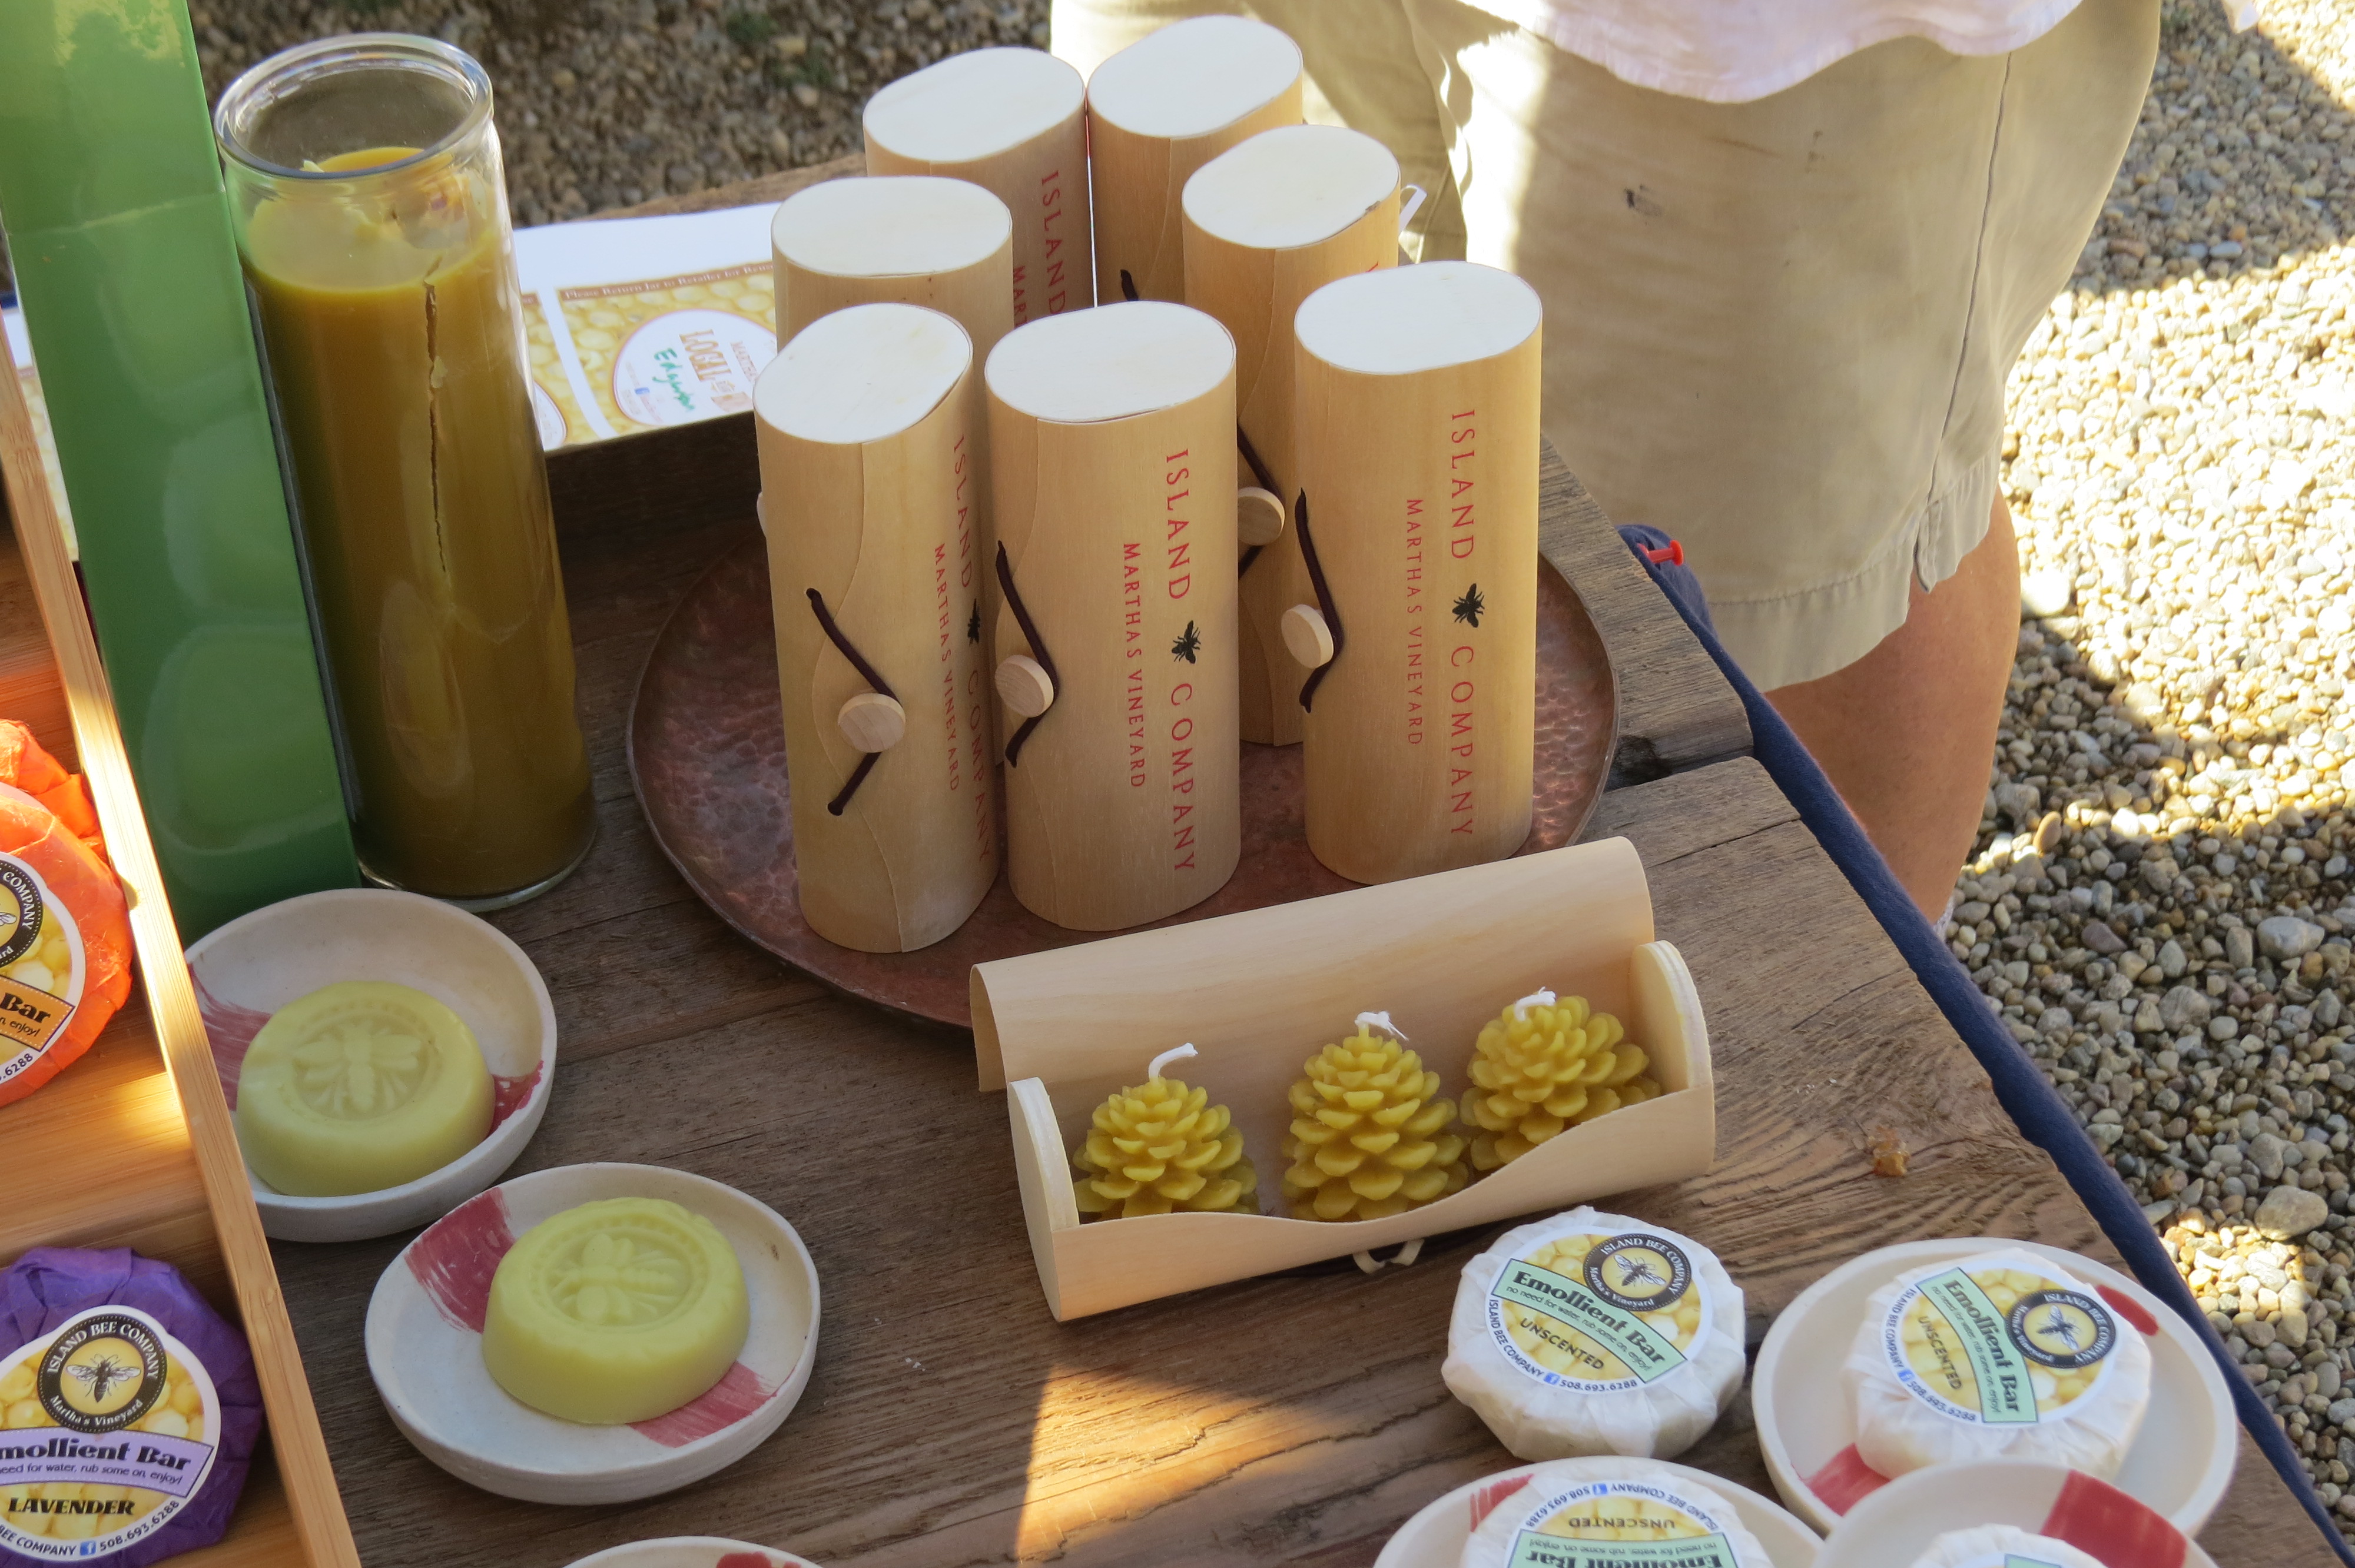 Beeswax Products at the West Tisbury Farmers Market